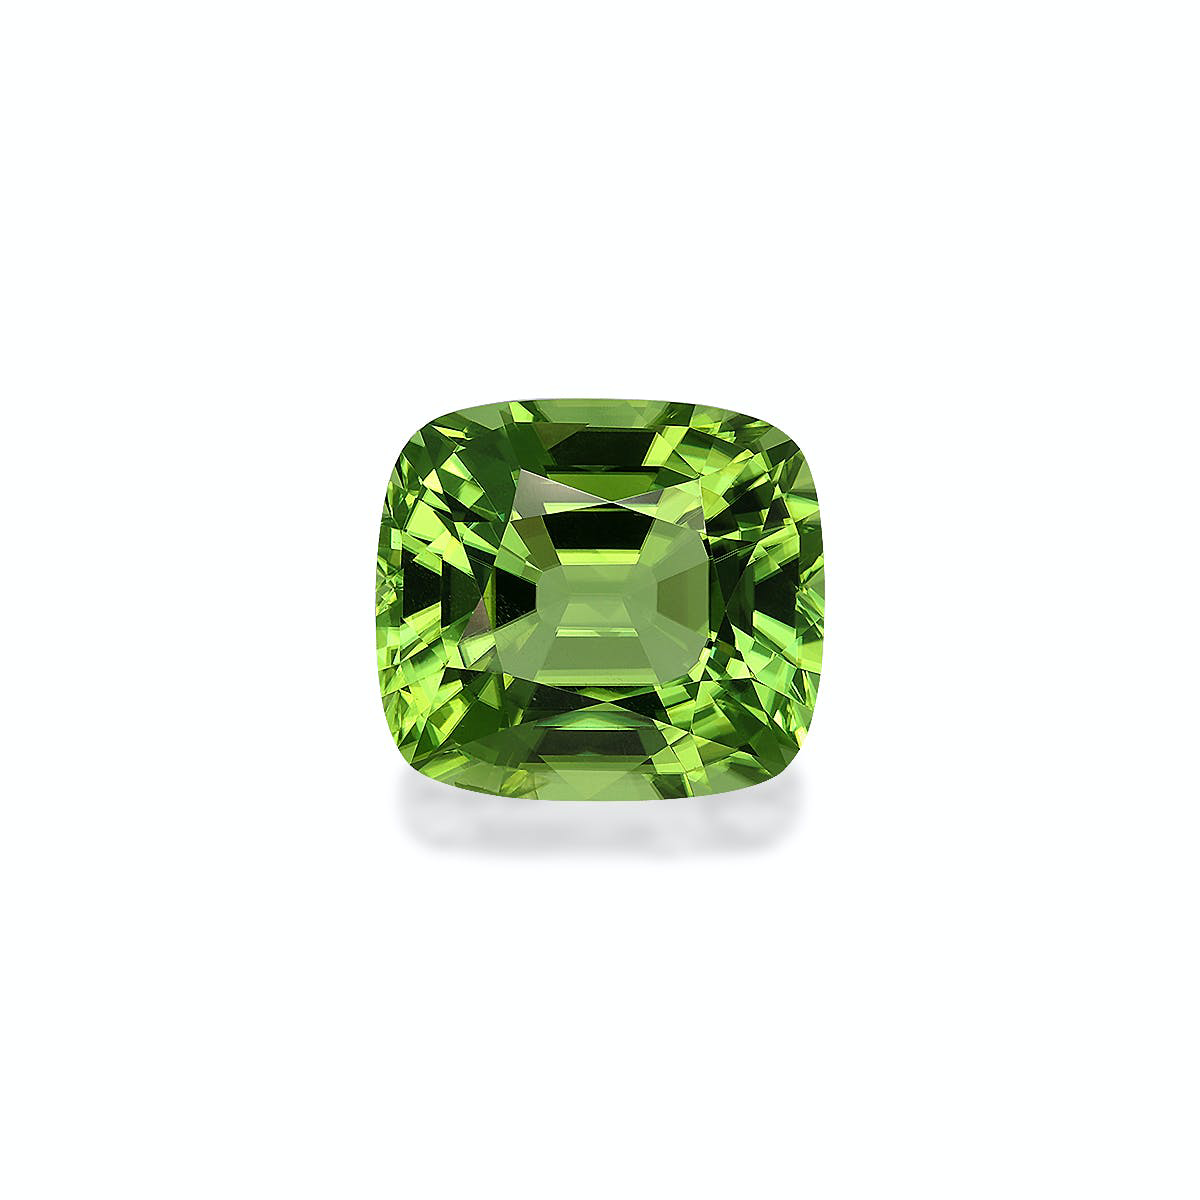 Picture of Vivid Green Peridot 20.45ct - 17x15mm (PD0335)